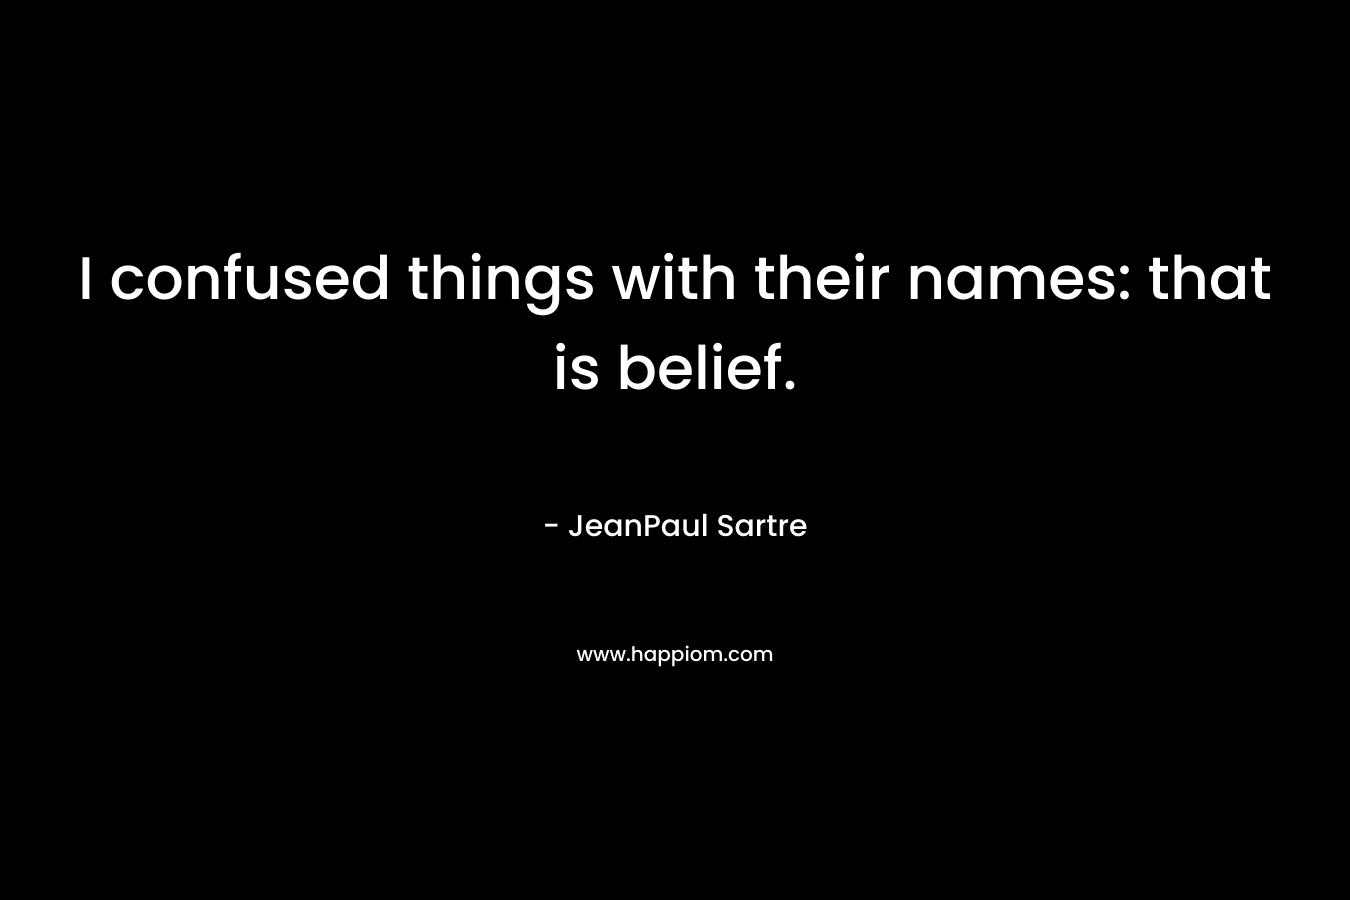 I confused things with their names: that is belief.